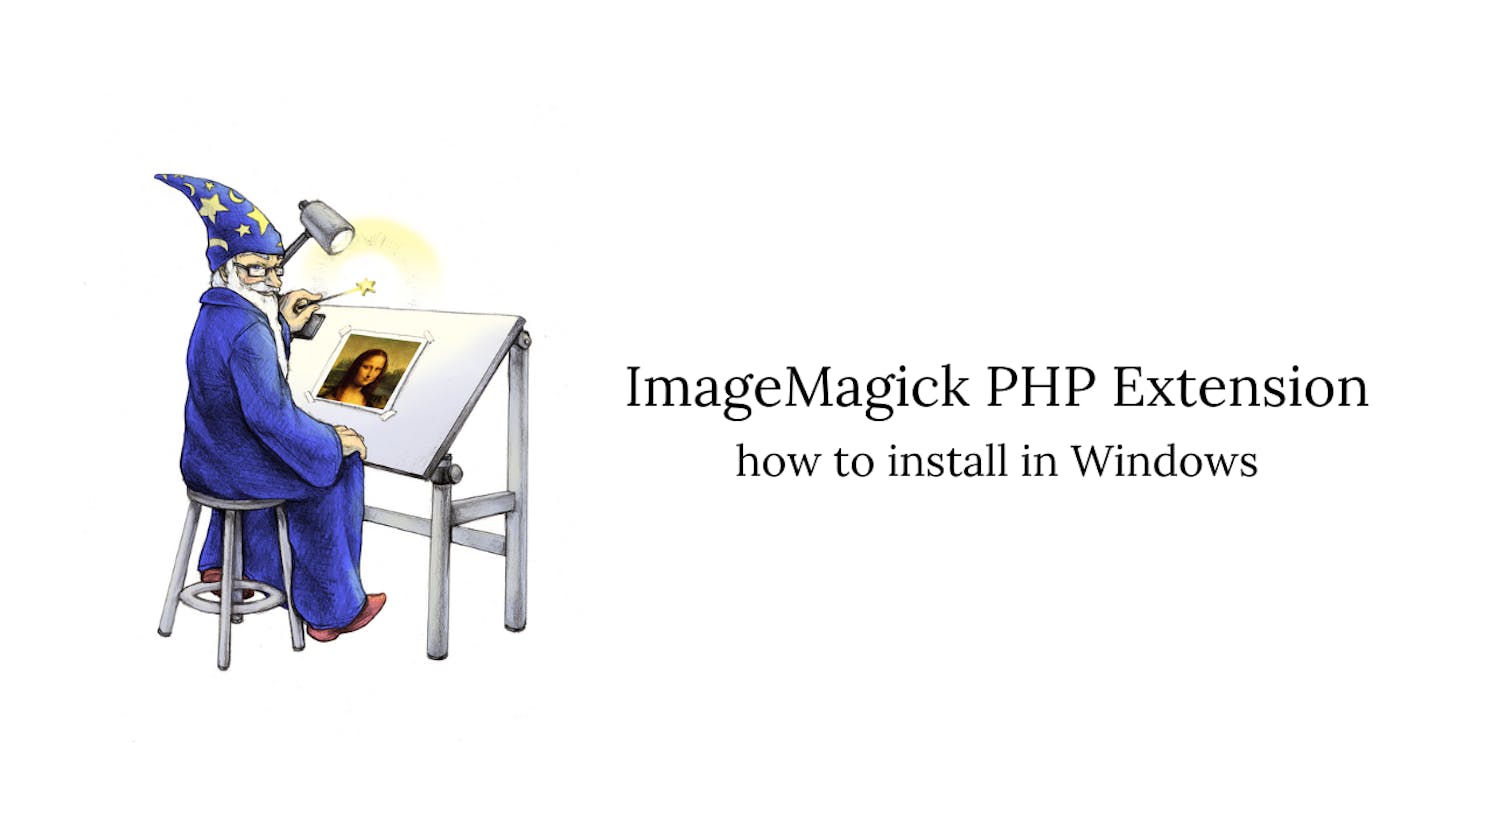 How to install ImageMagick PHP extension in Windows